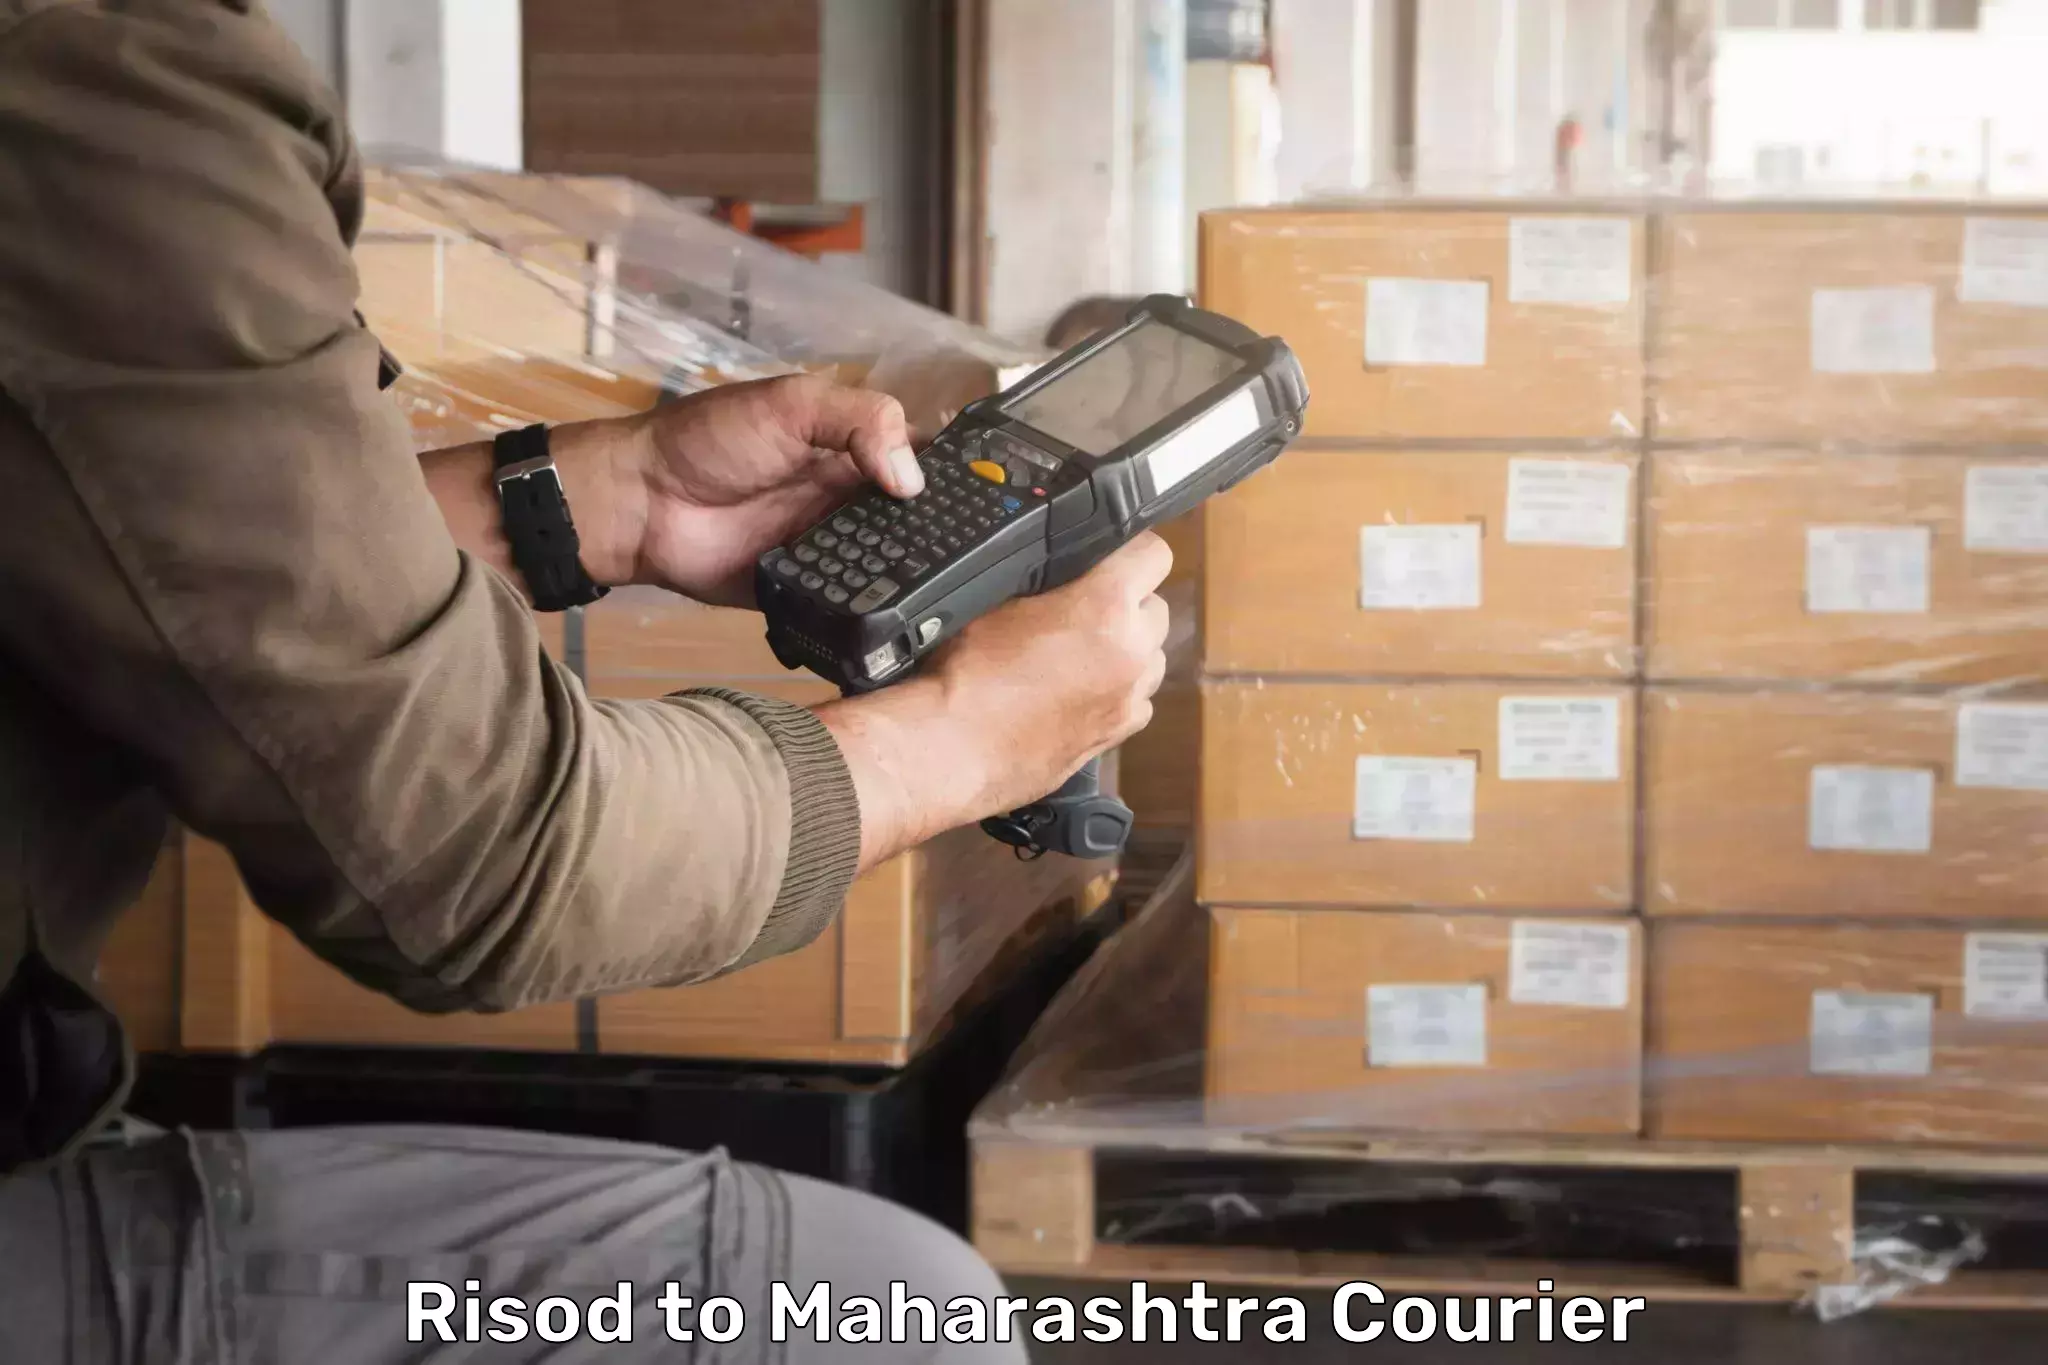 Tech-enabled shipping in Risod to Maharashtra